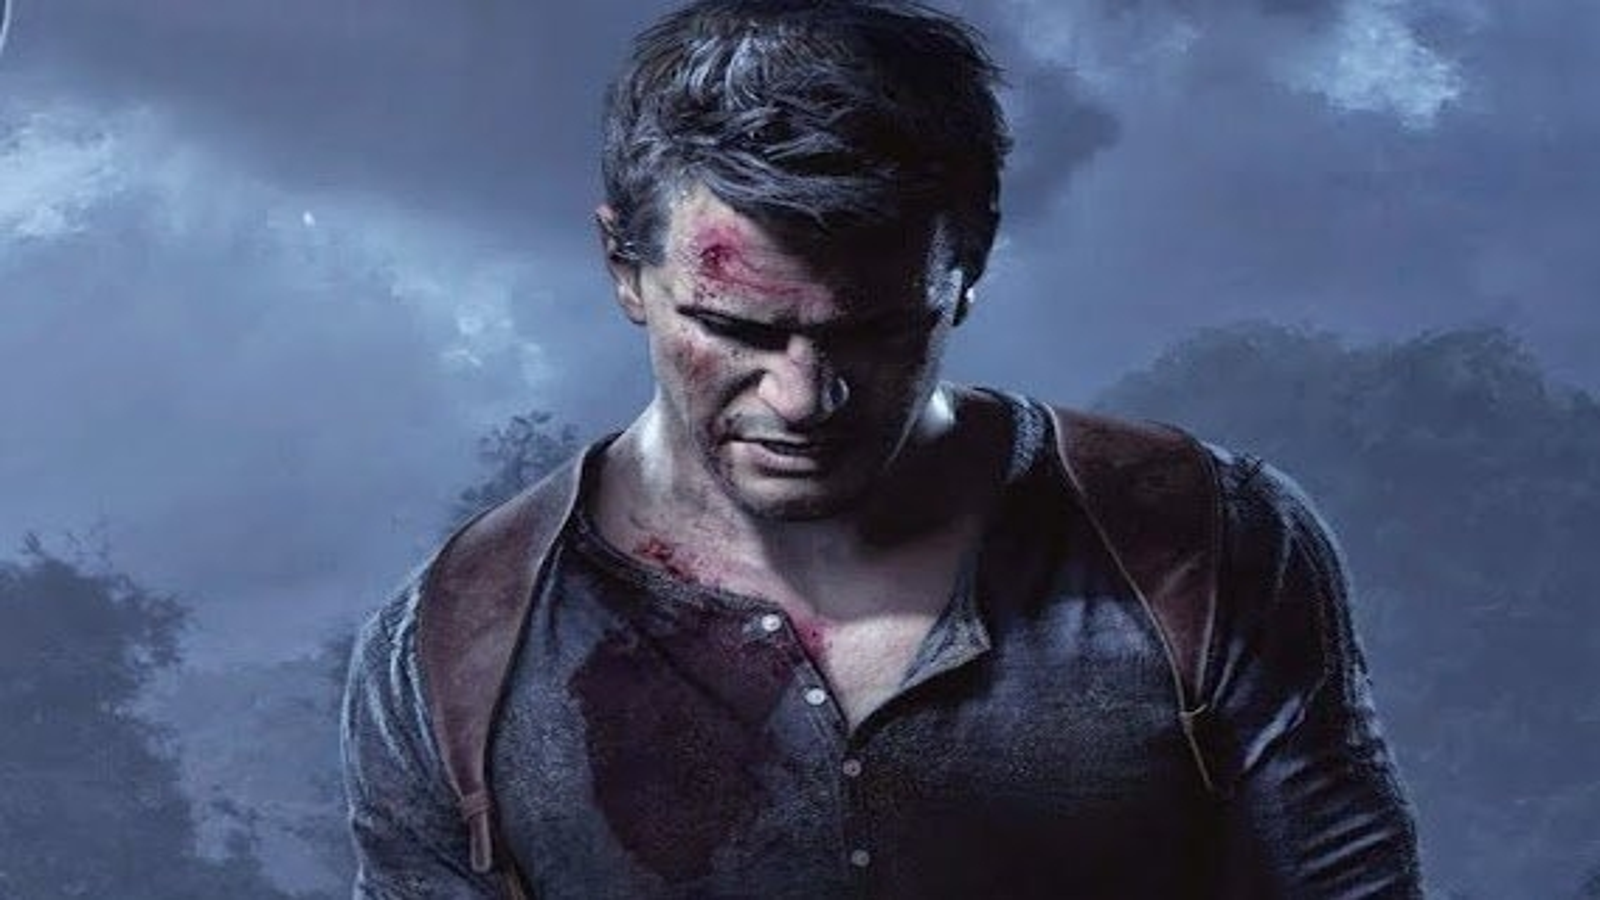 8 Months of Work on Uncharted 4 Was Scrapped, Says Nathan Drake